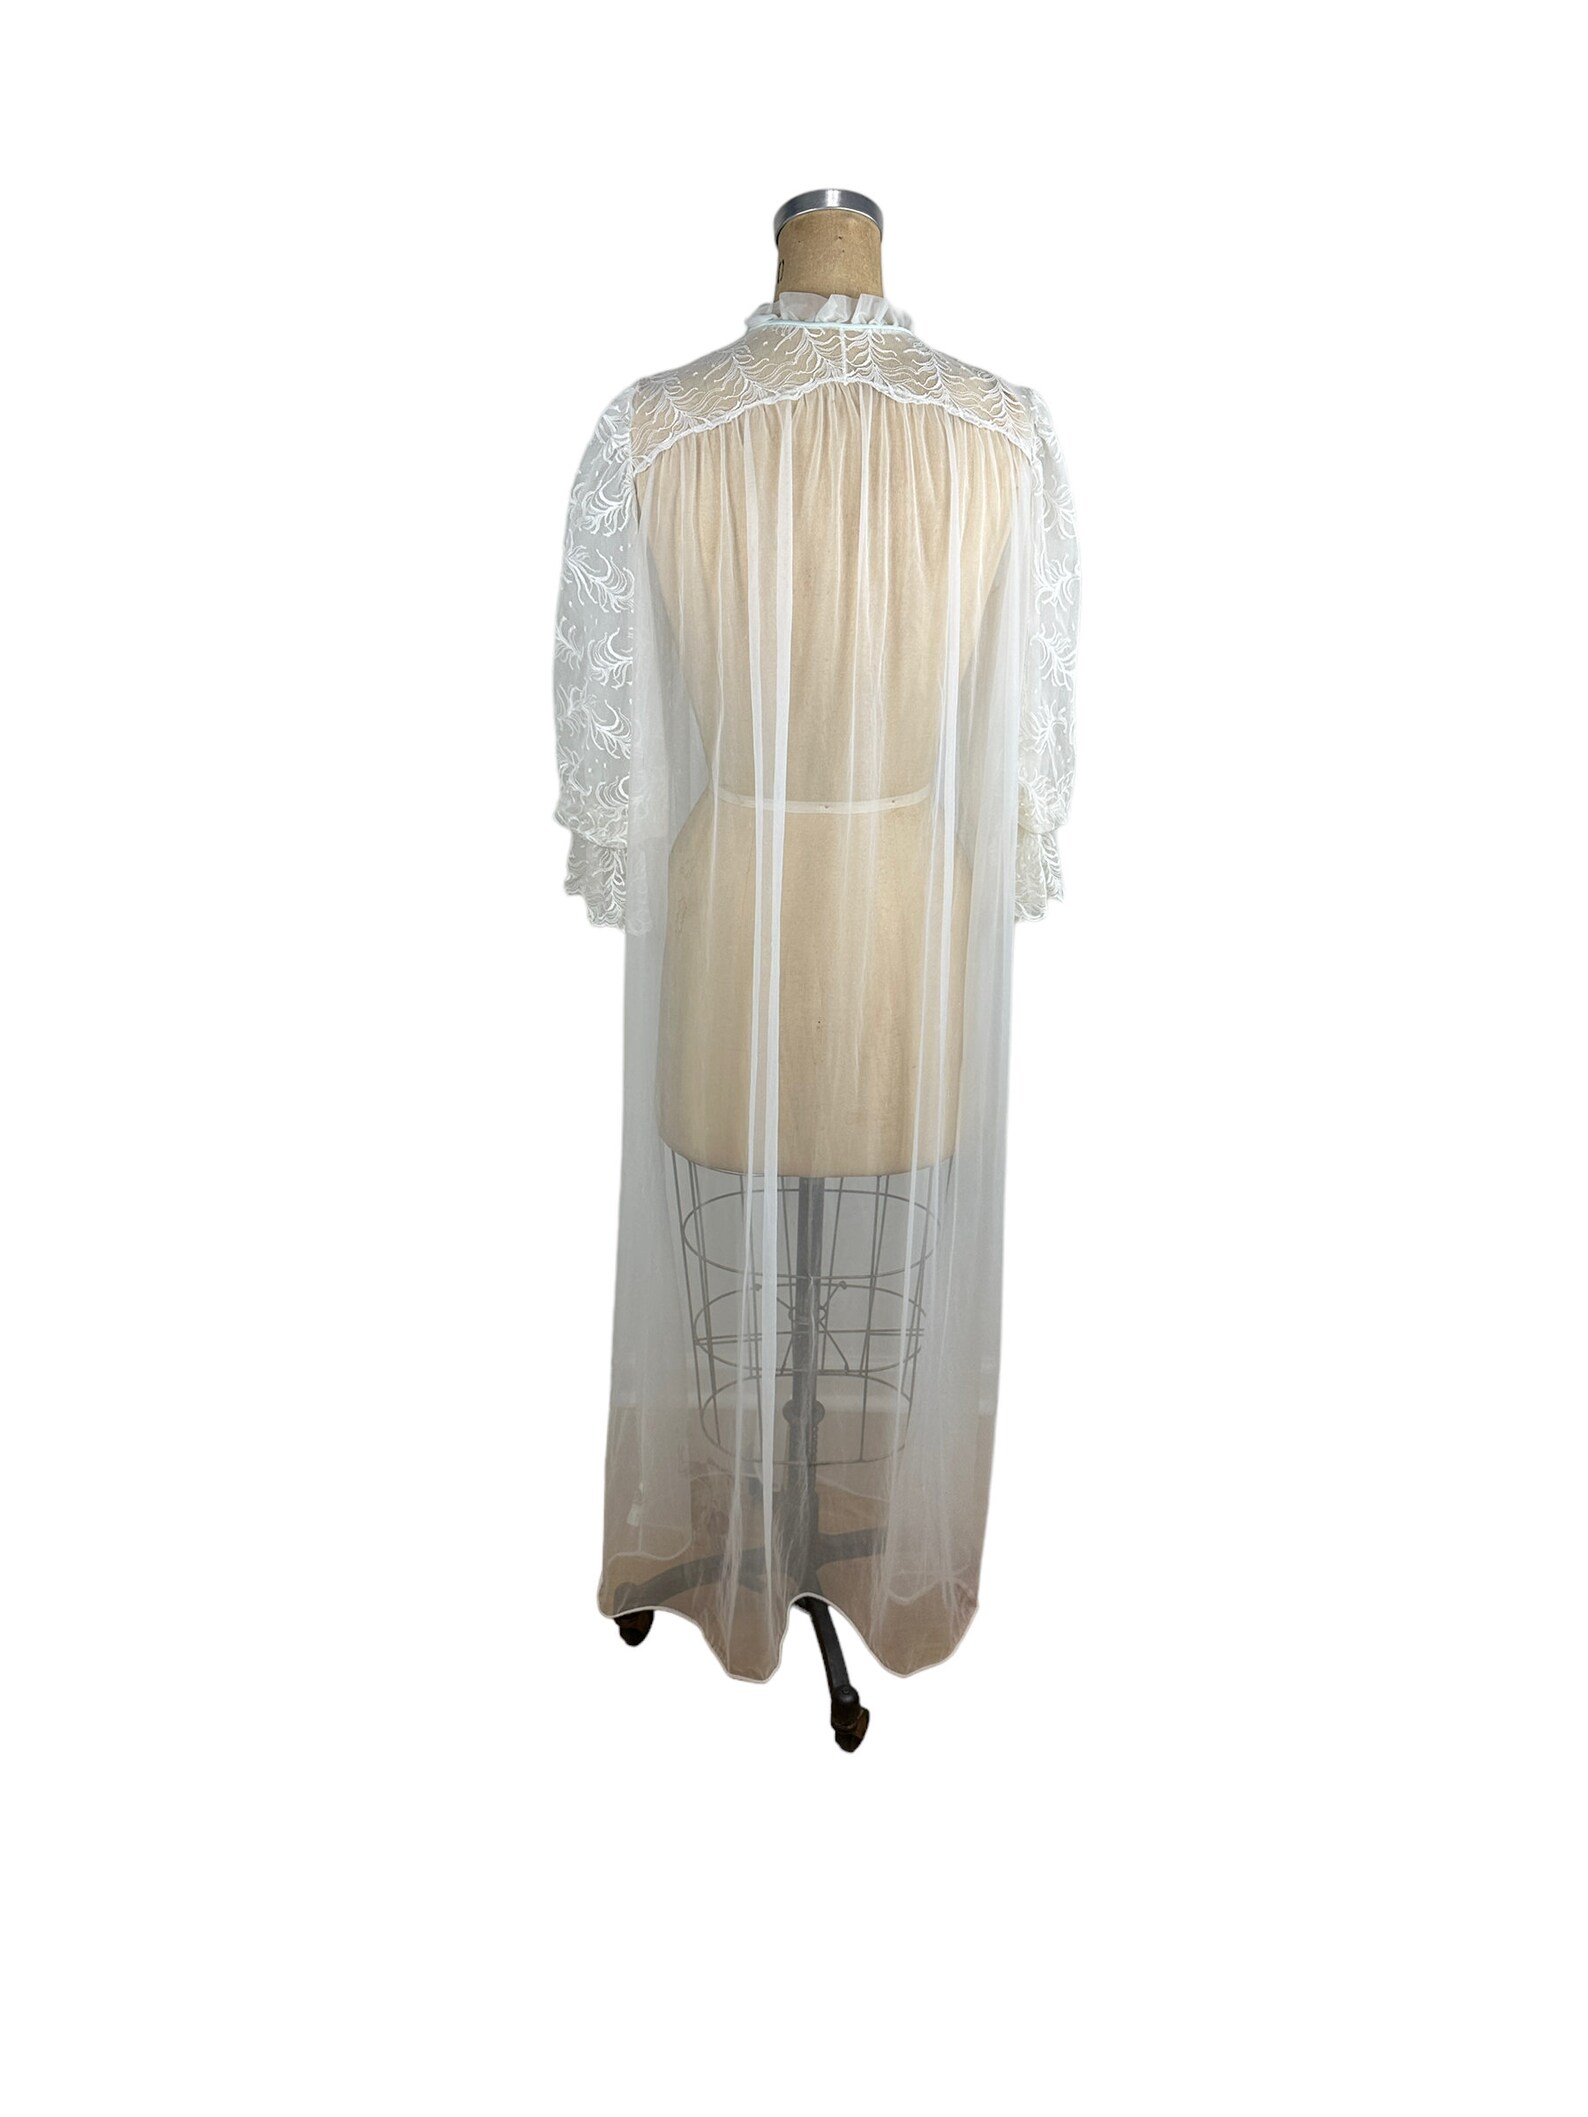 1960s White Sheer Robe With Puffed Lace Sleeves Size M by Val - Etsy